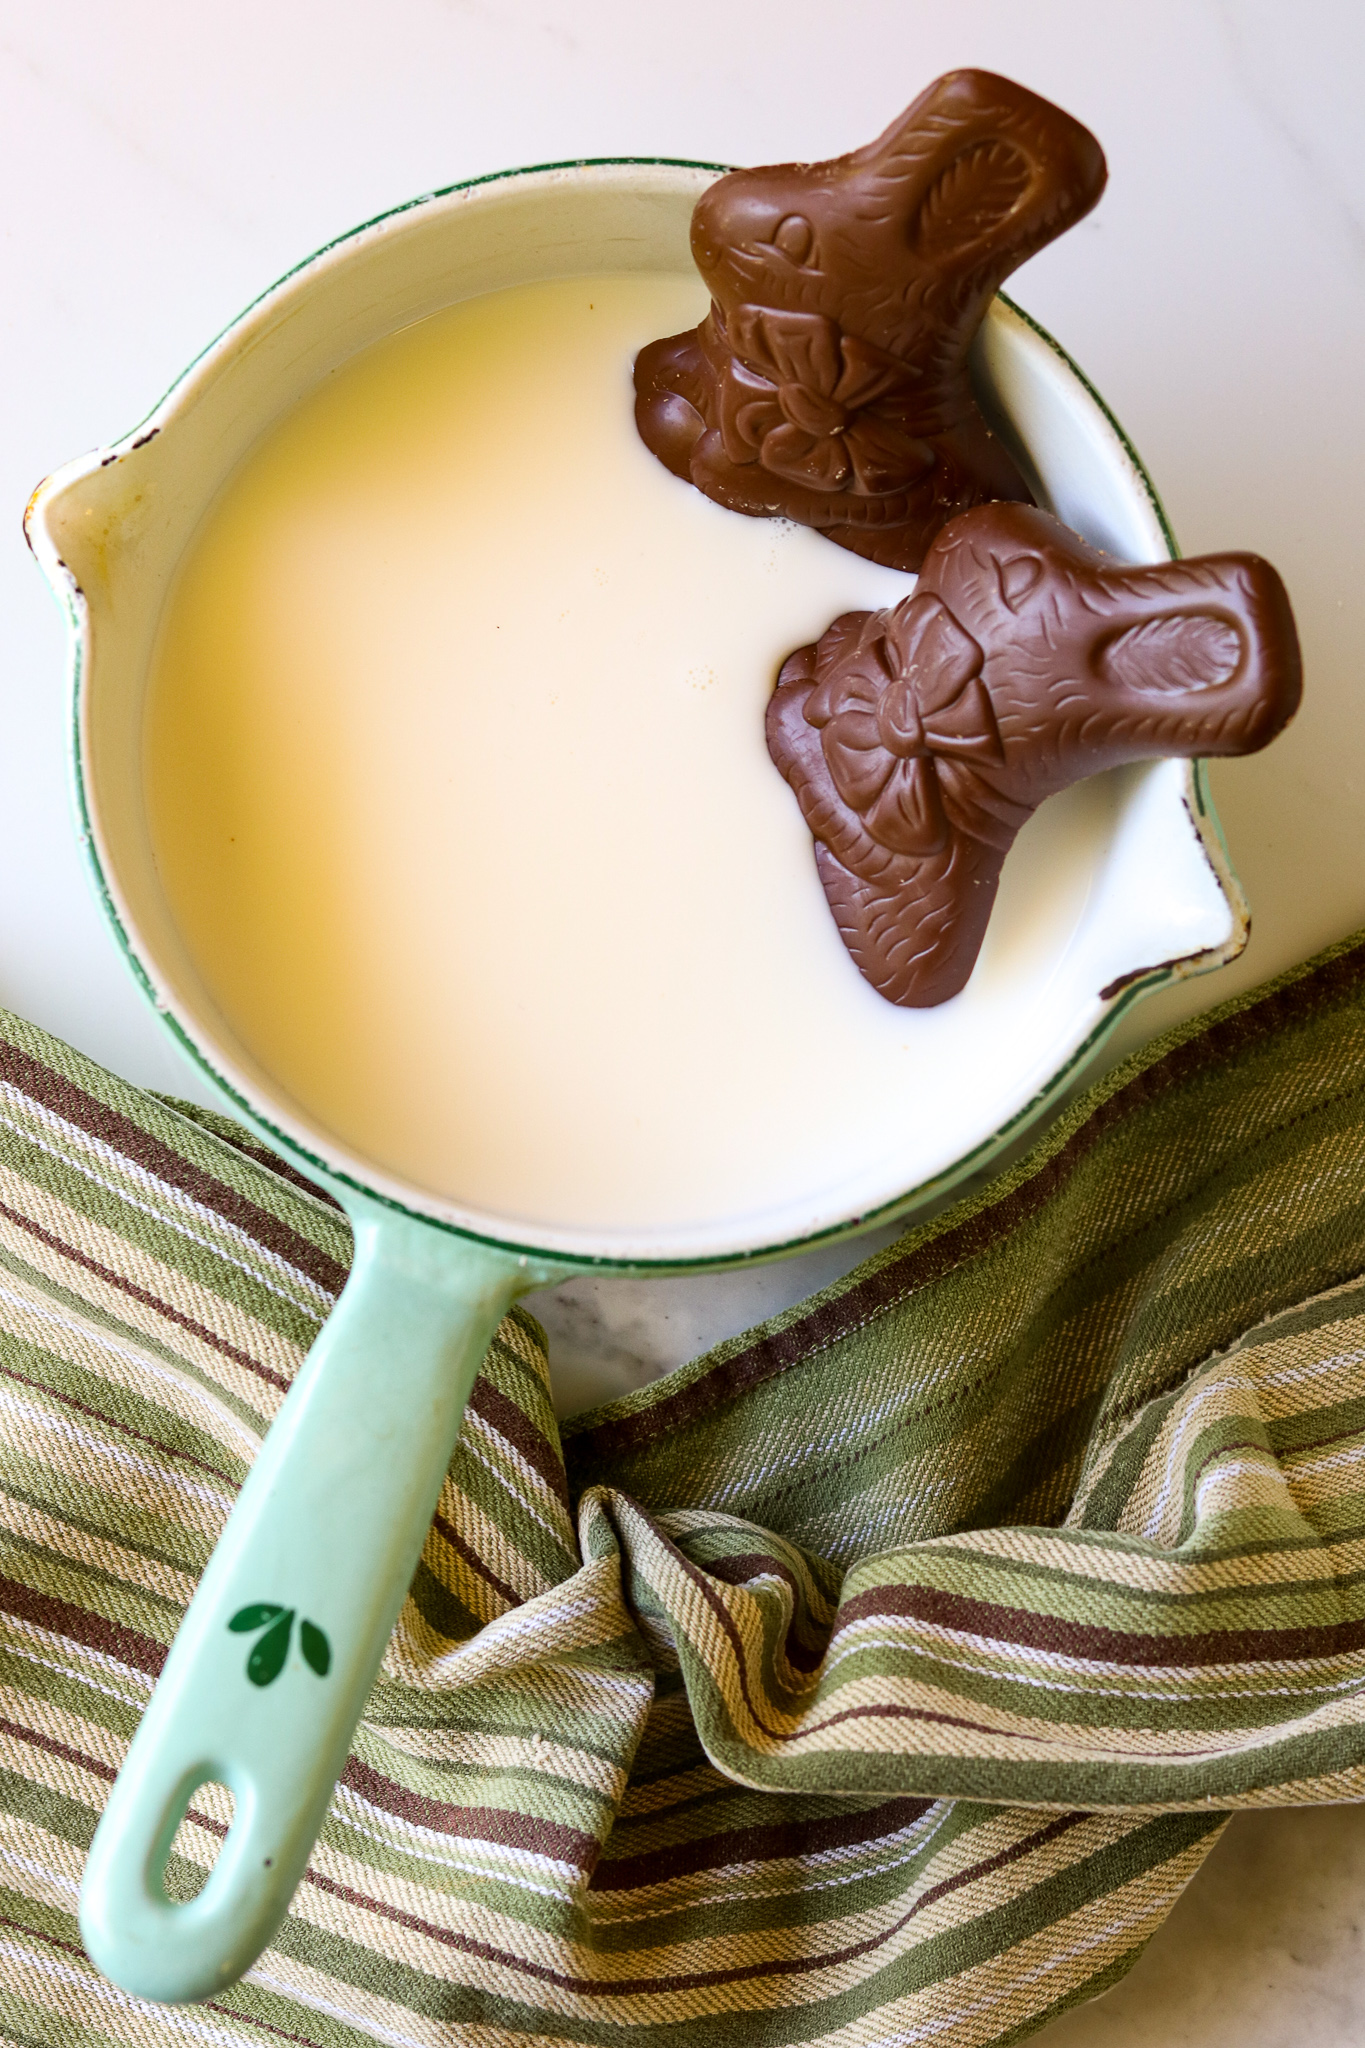 A sauce pan with milk and 2 chocolate Easter bunnies in it.